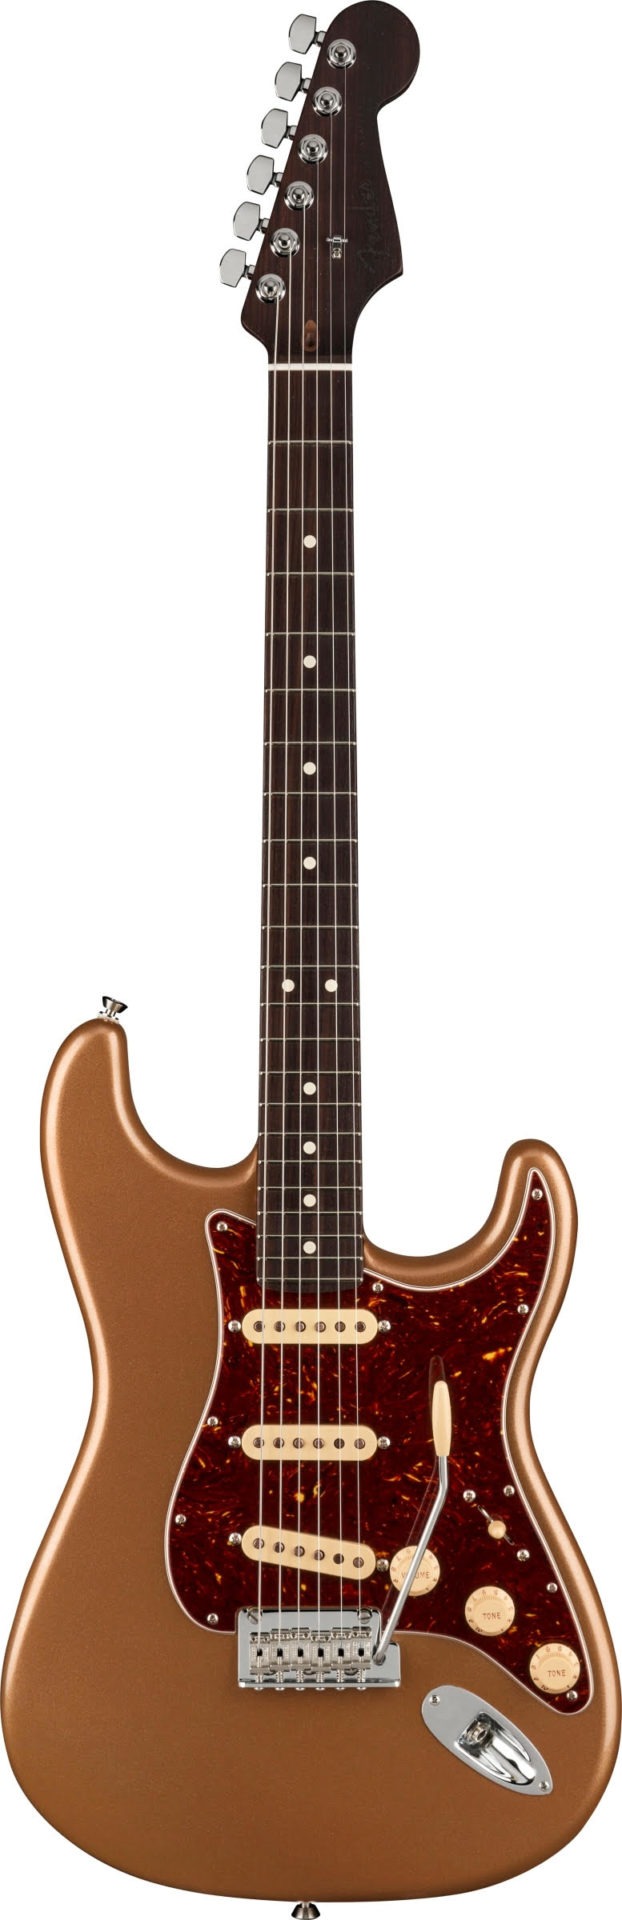 FENDER STRATOCASTER AM PRO LIMITED ROSEWOOD